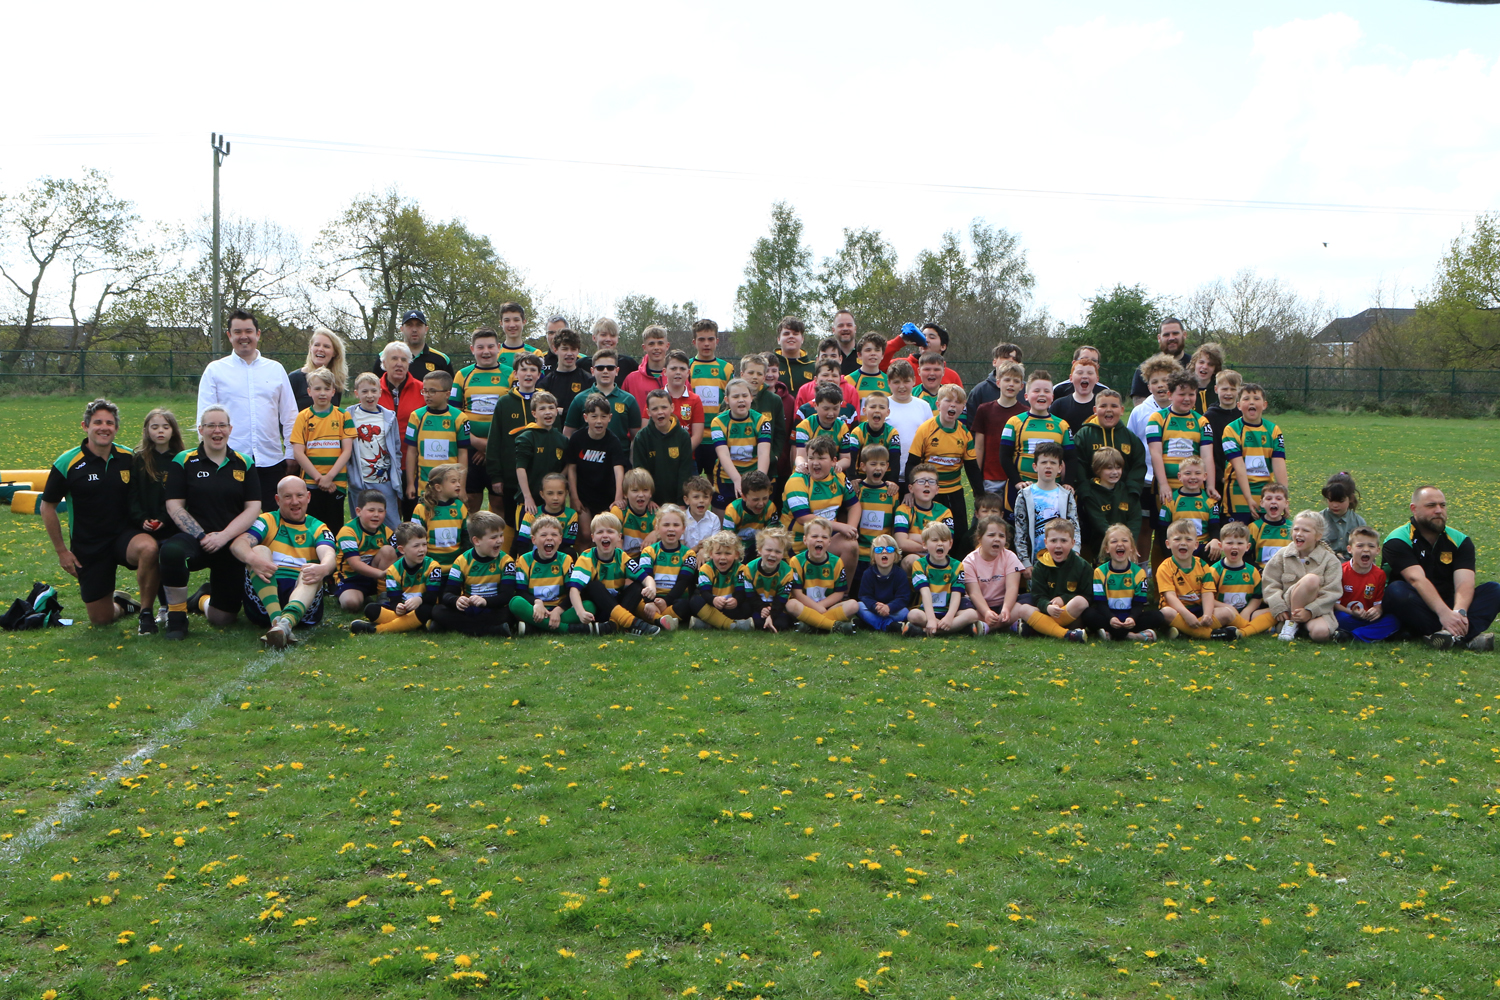 Grant is a ‘Club Changer’ for Rugby in Retford